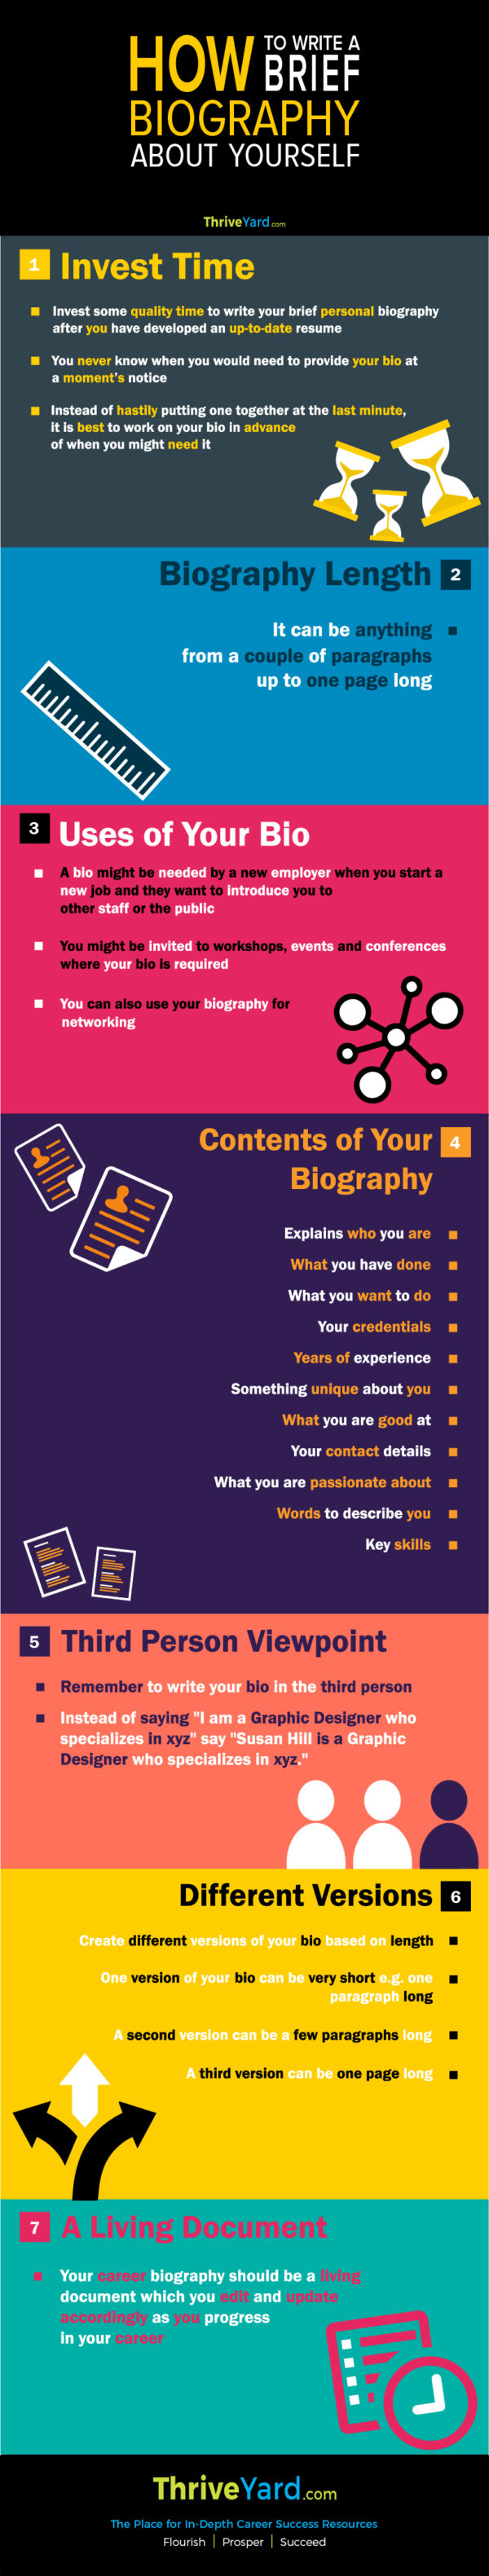 How To Write A Brief Biography About Yourself - Infographic